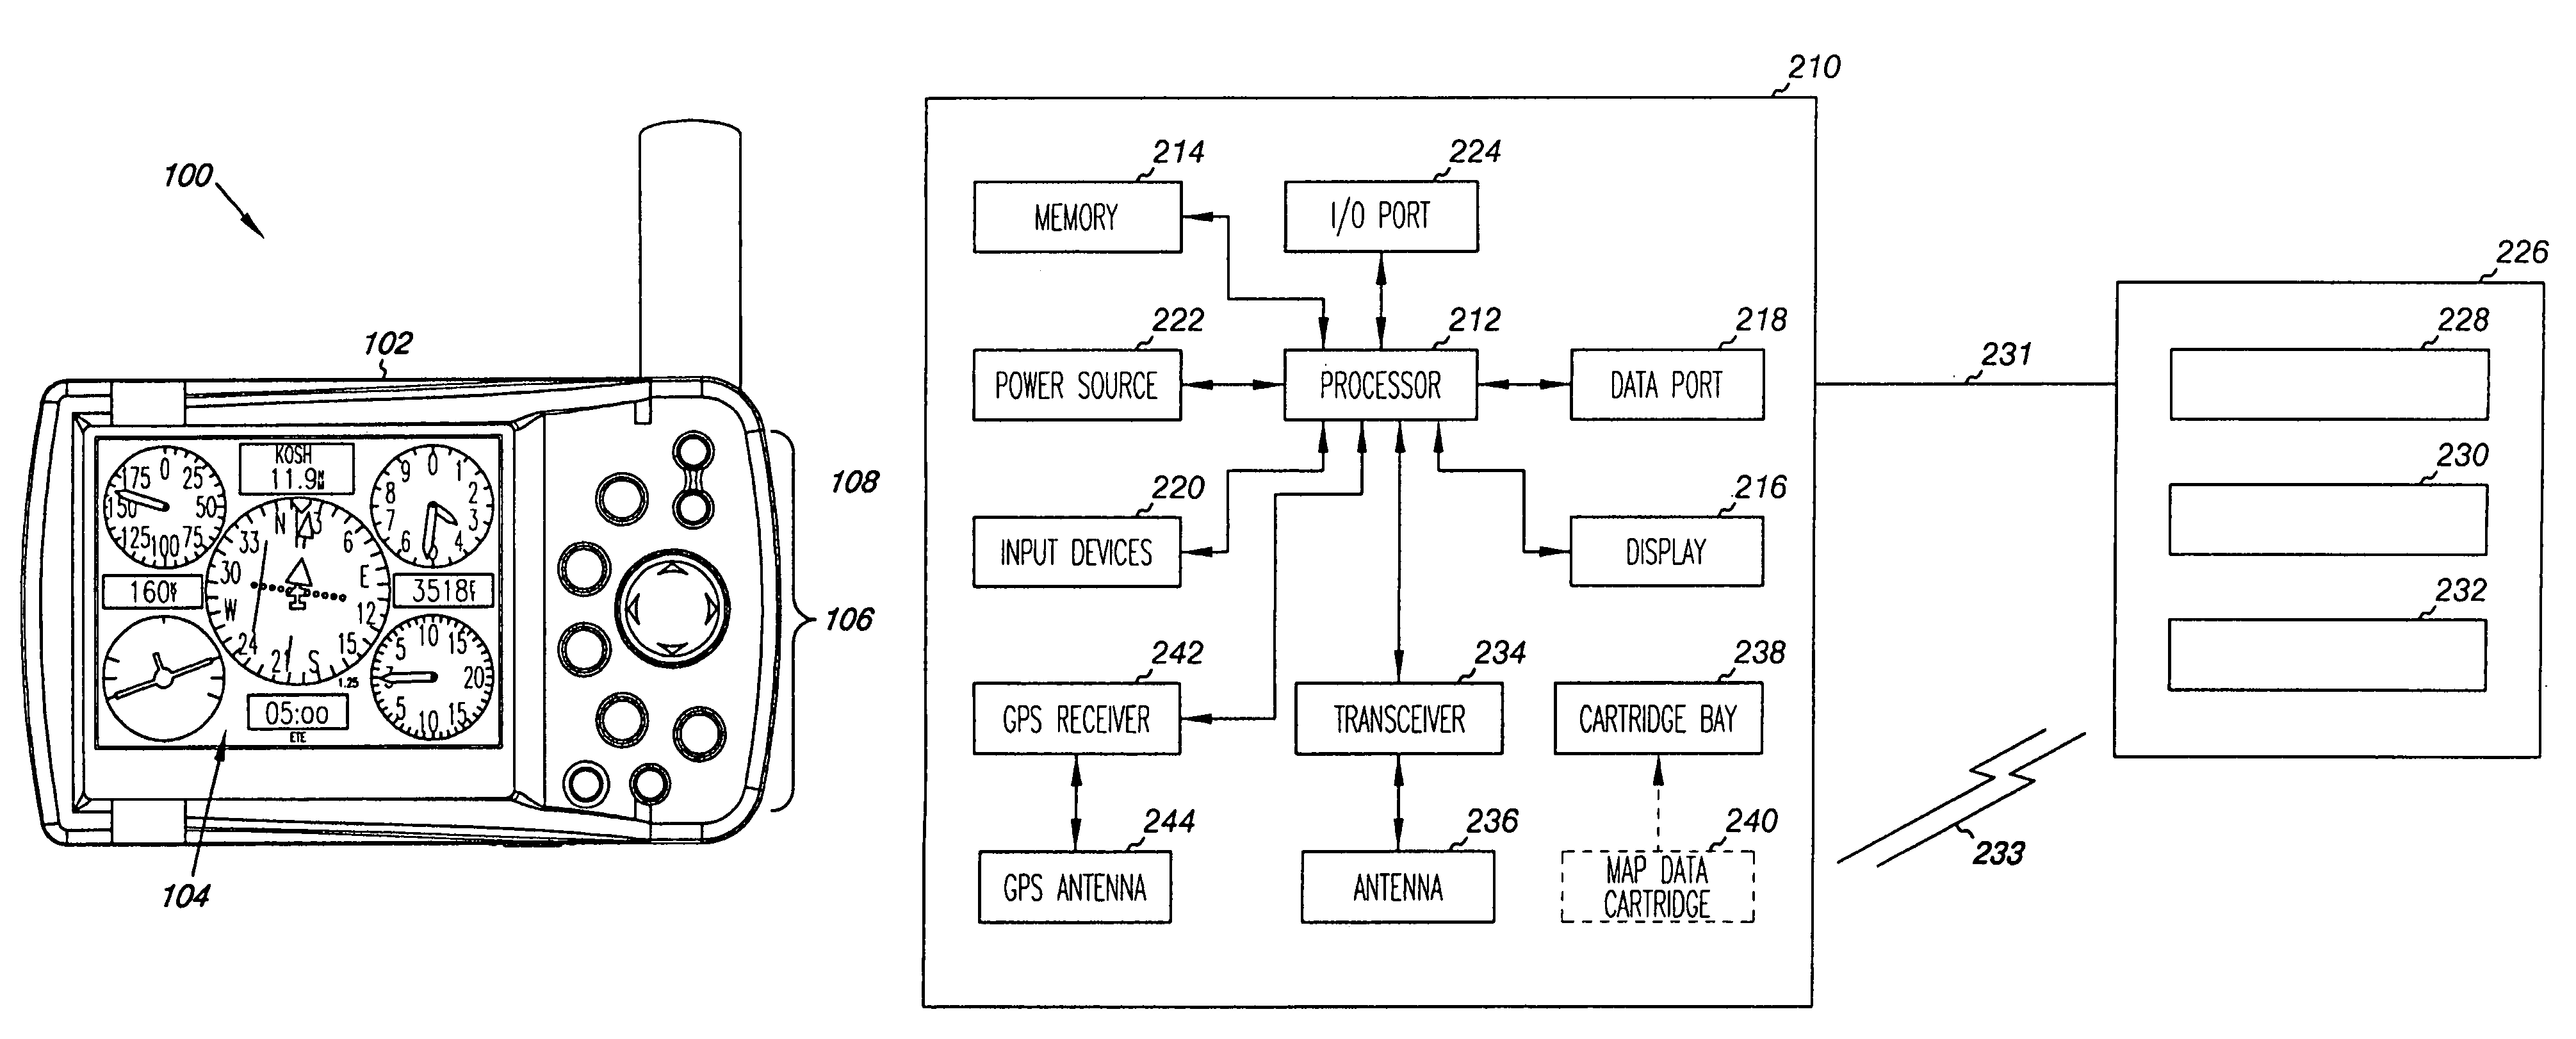 Methods, devices, and systems for automatic flight logs